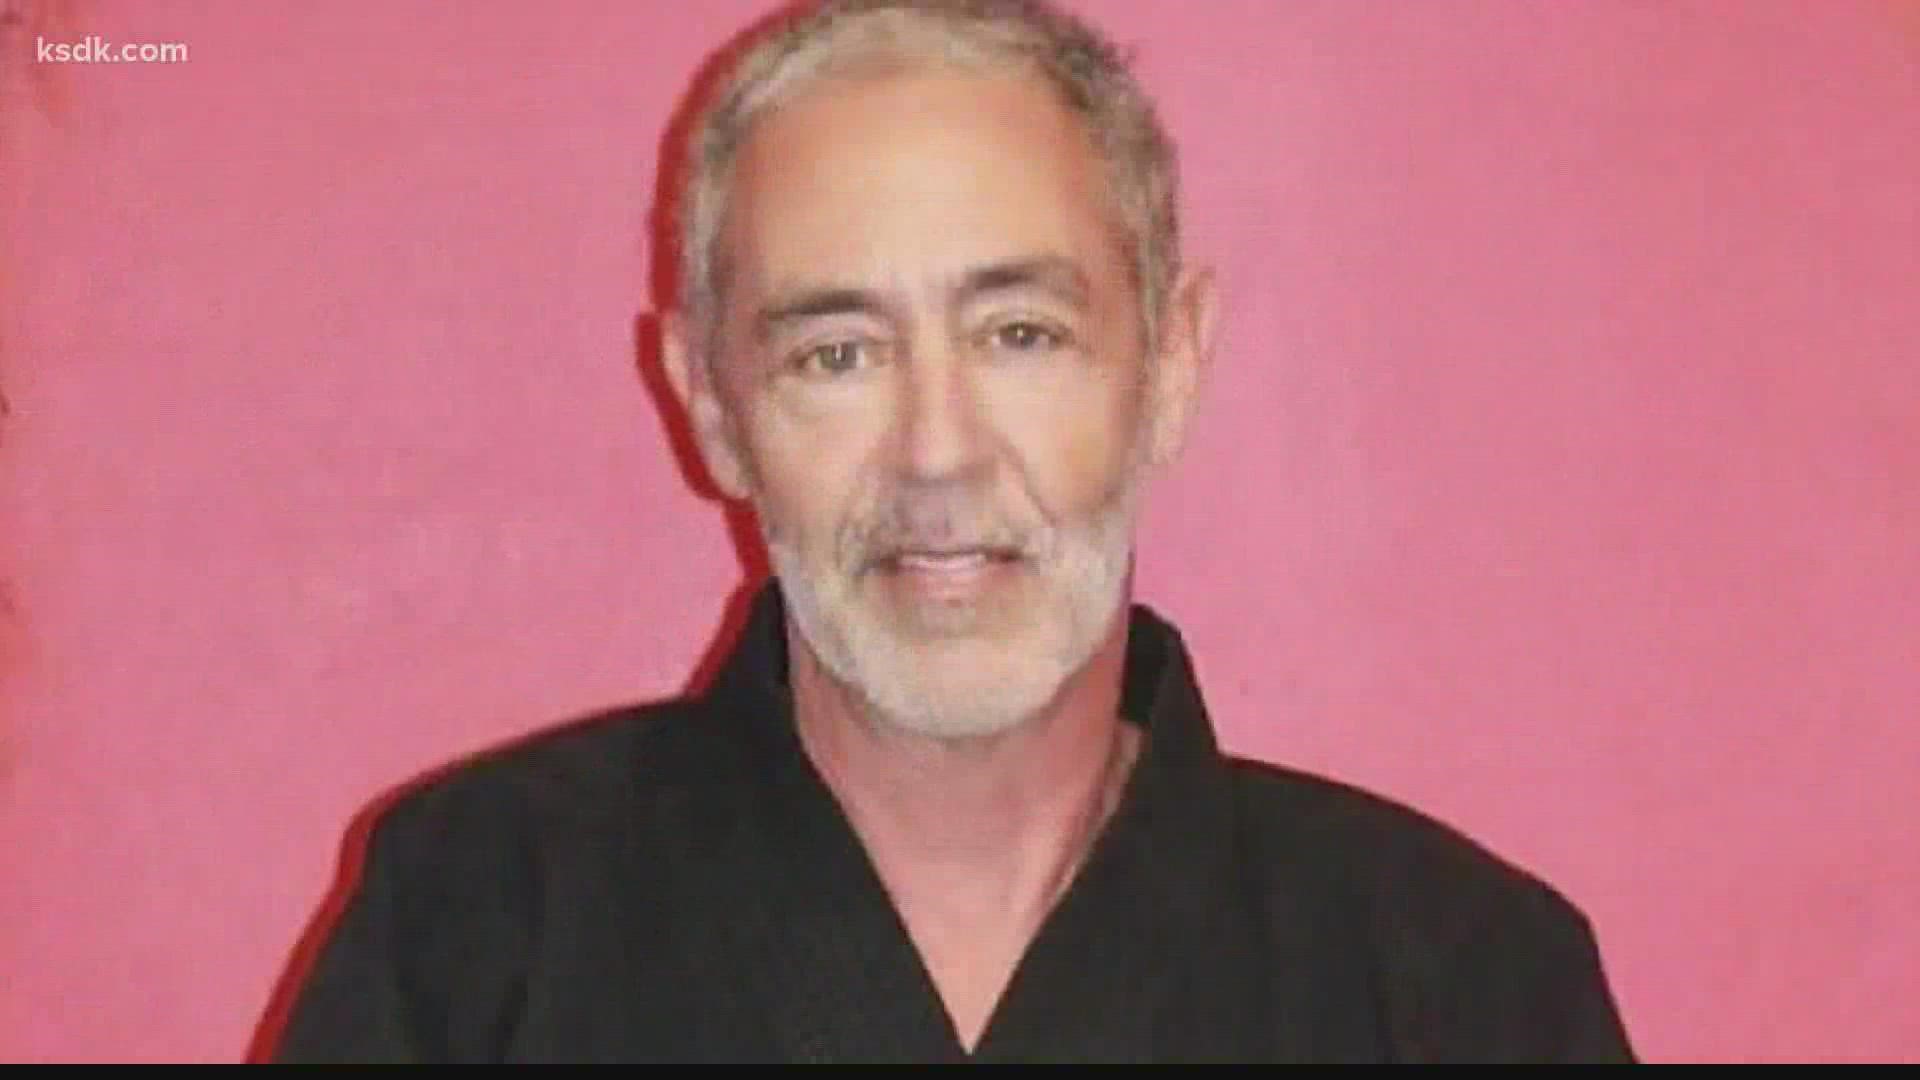 Long-time martial arts instructor Steve Sutton died of carbon monoxide poisoning on his boat